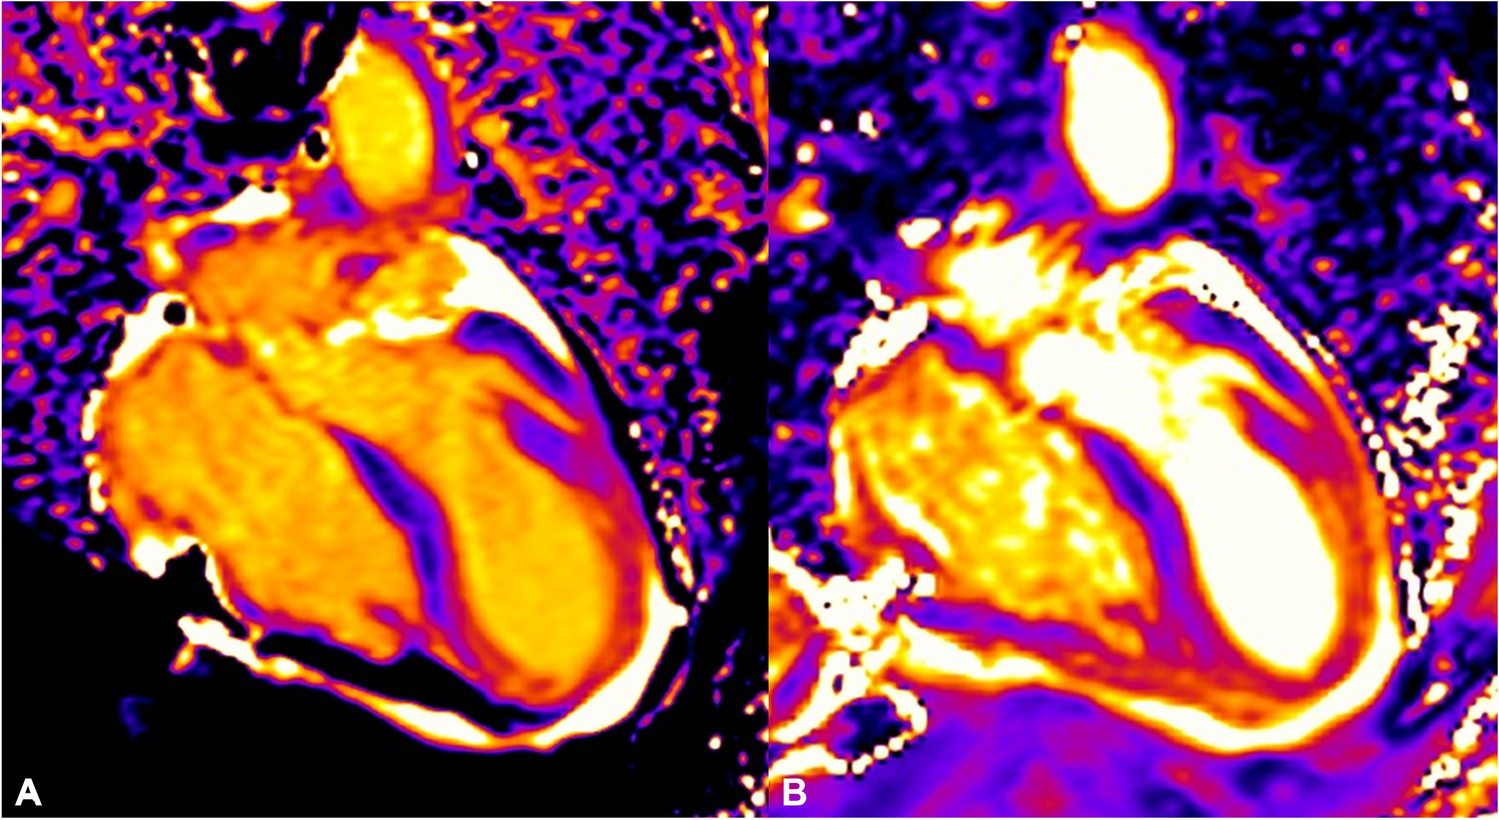 Advanced Cardiovascular Magnetic Resonance Imaging in Takotsubo Syndrome: Update on Feature Tracking and Tissue Mapping